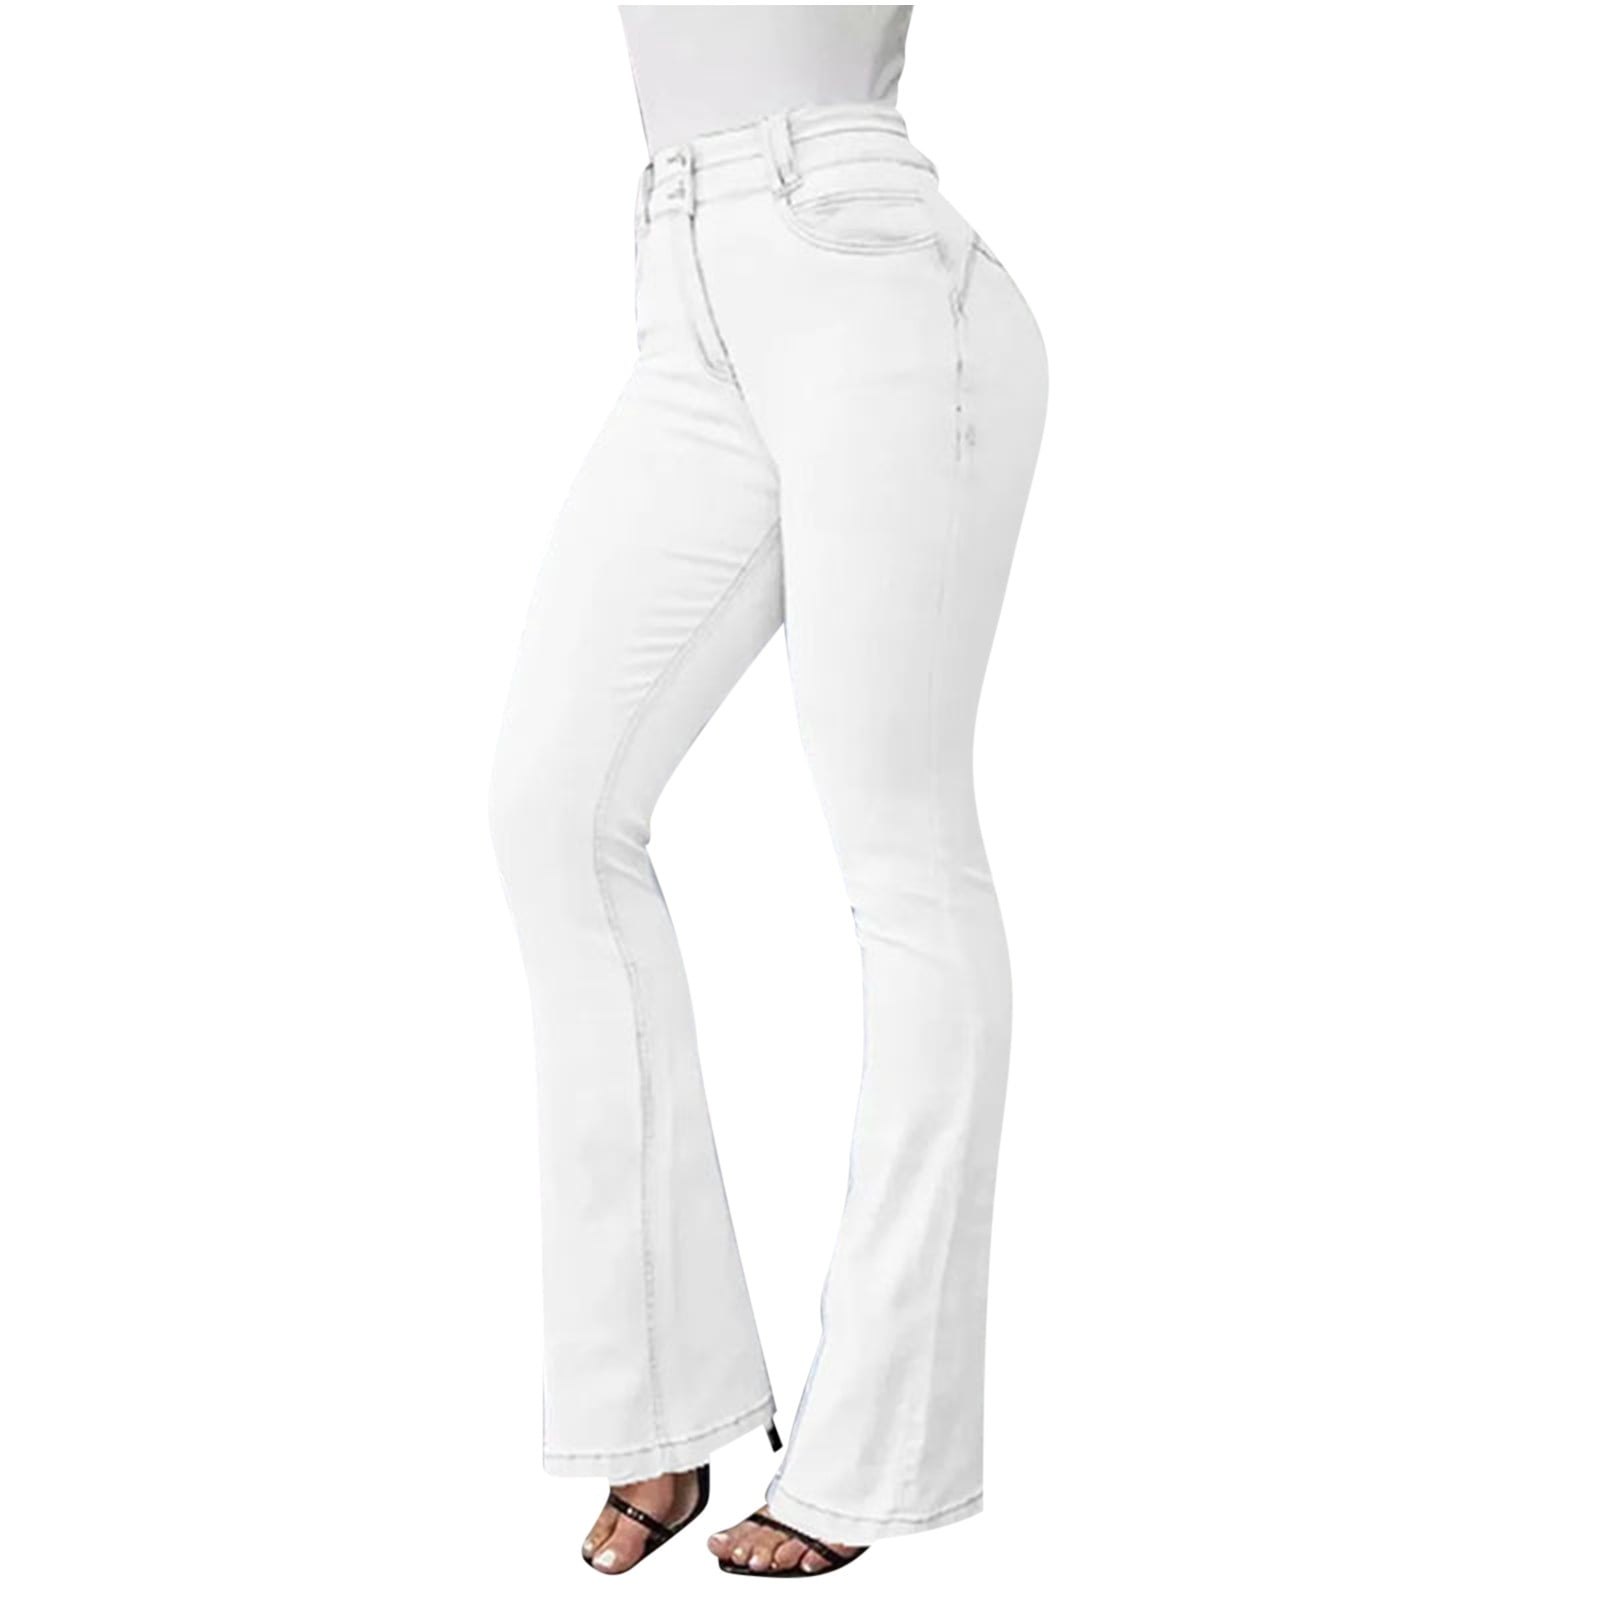 YYDGH Bell Bottom Jeans for Women High Waisted Classic Flared Denim ...